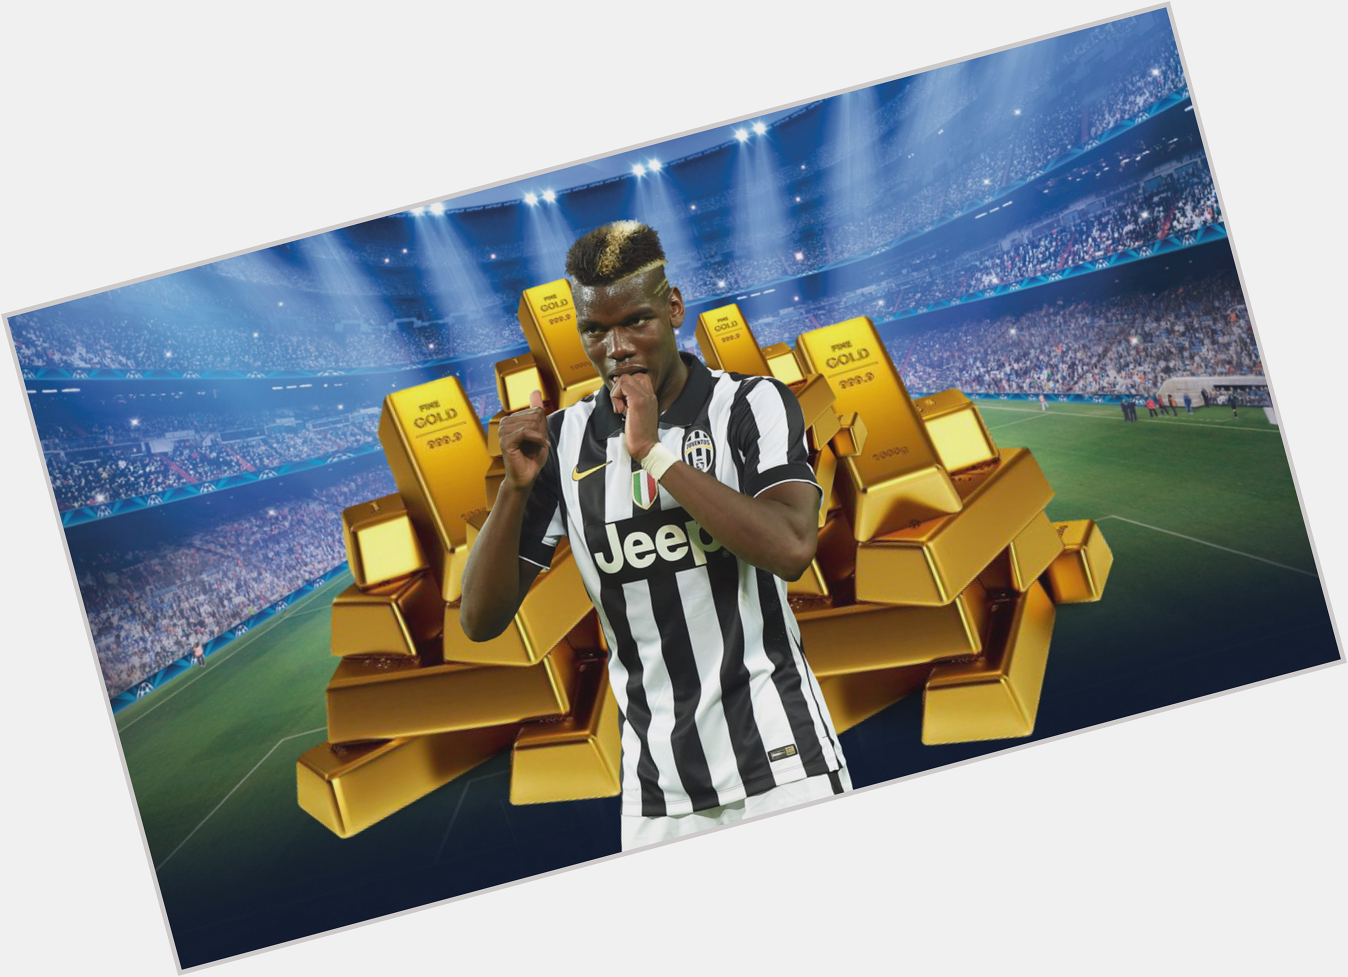 Happy Birthday, Paul Pogba, 22! What do you get the most exciting young player in world football? 